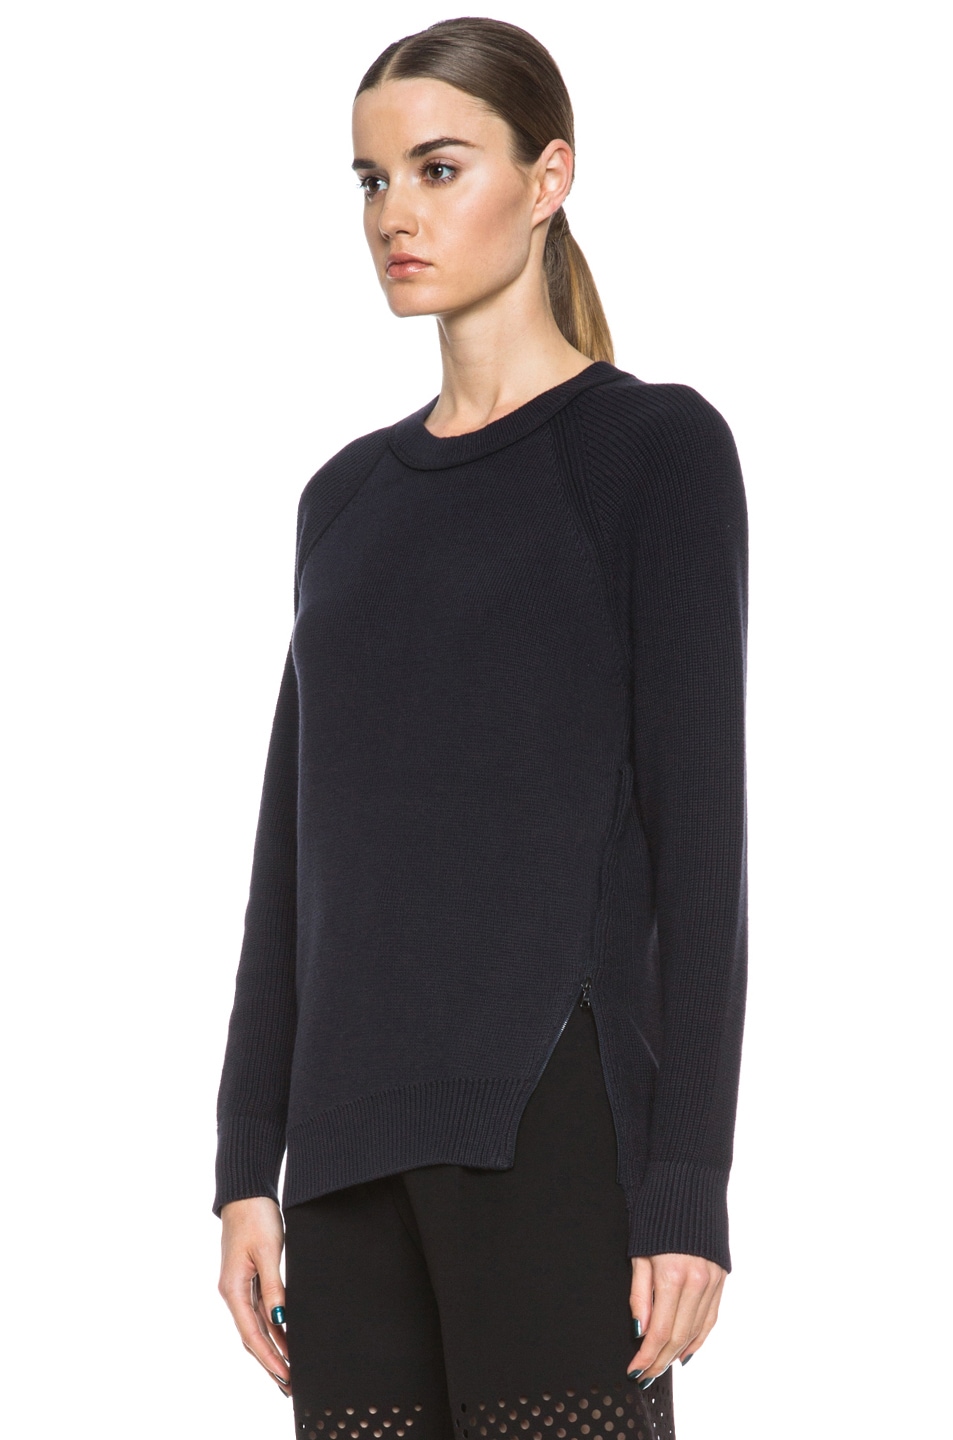 3.1 phillip lim Knit Crewneck Sweater with Piping in Navy | FWRD